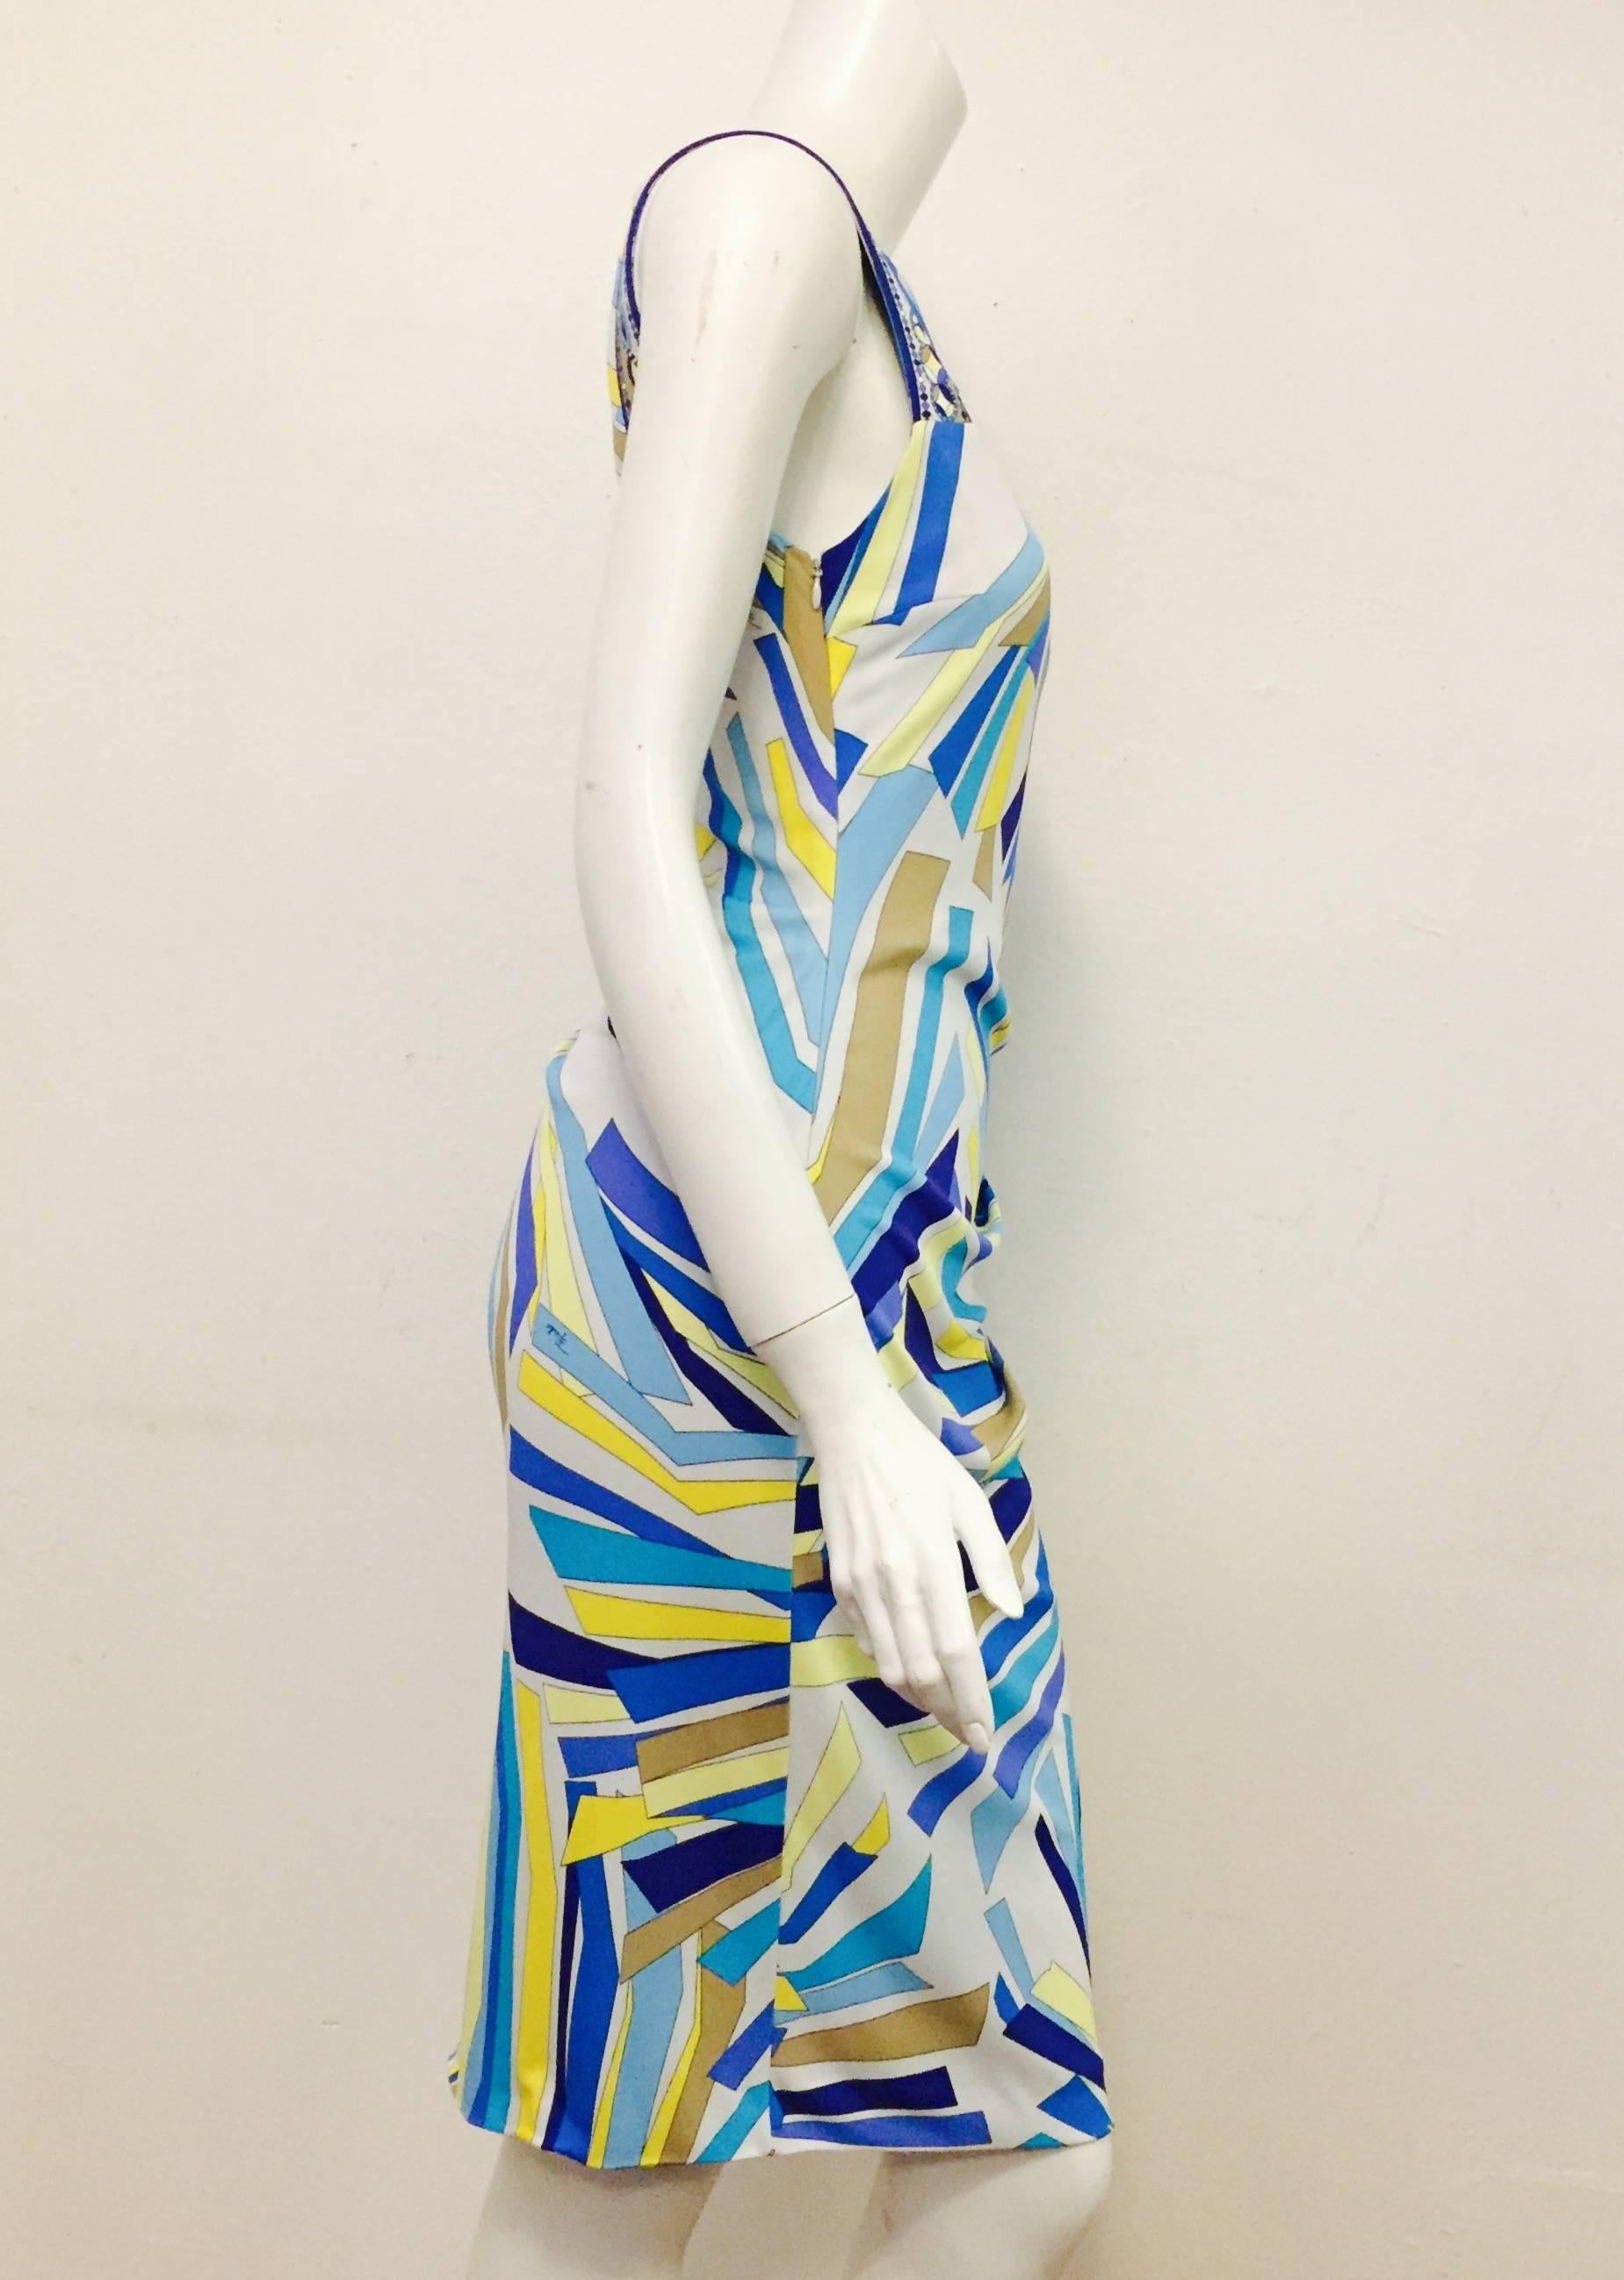 Sleeveless Exotic Print Sheath Dress is quintessentially Emilio Pucci!  Abstract seafoam, turquoise, aubergine, and sunburst yellow print highlights a form-fitting, flattering design. Dress is draped and gathered on left hip and features a